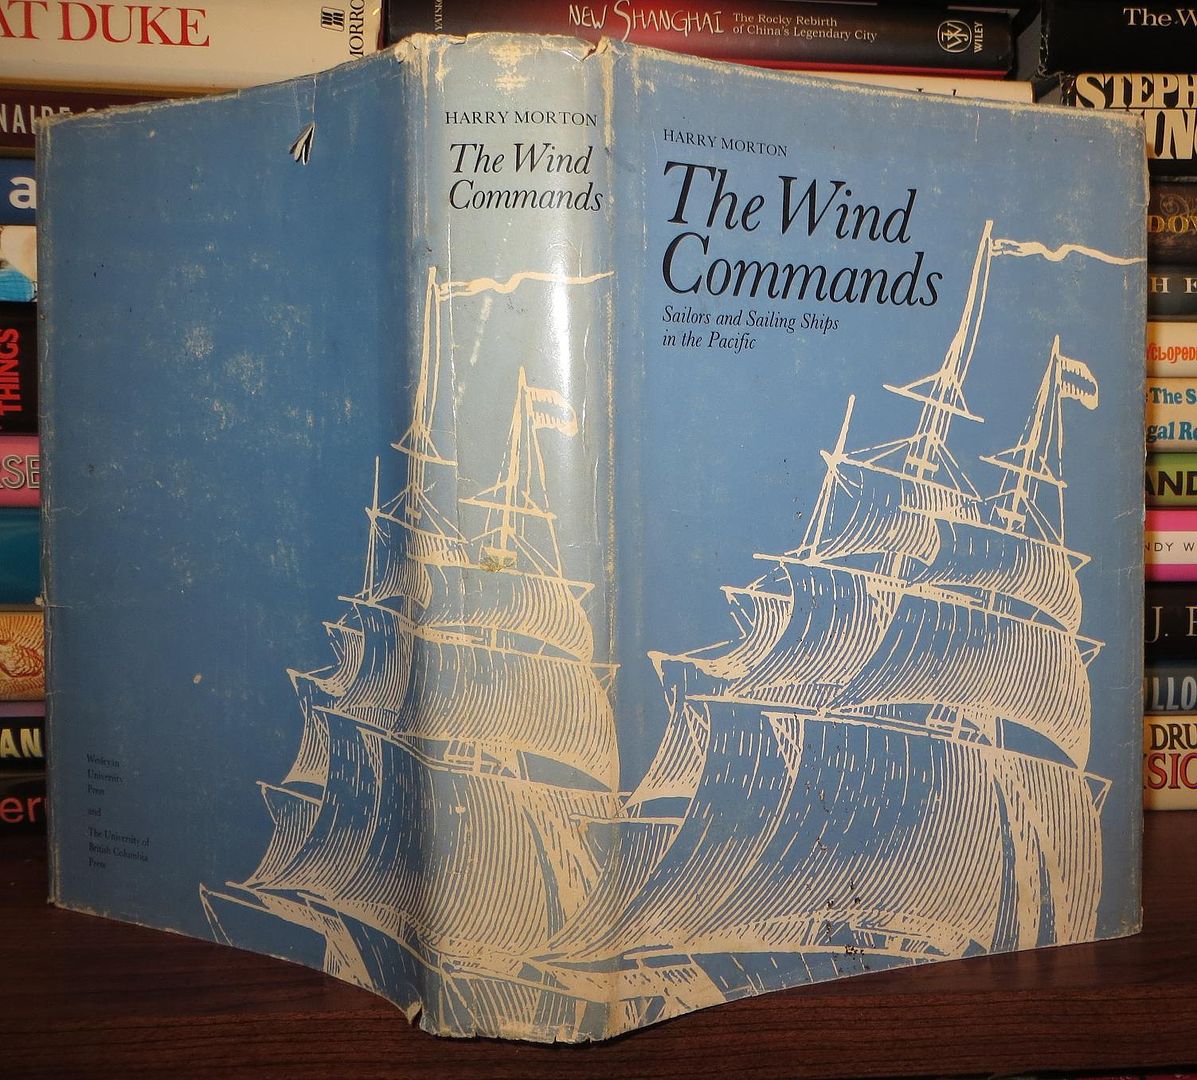 MORTON, HARRY A. - The Wind Commands Sailors and Sailing Ships in the Pacific